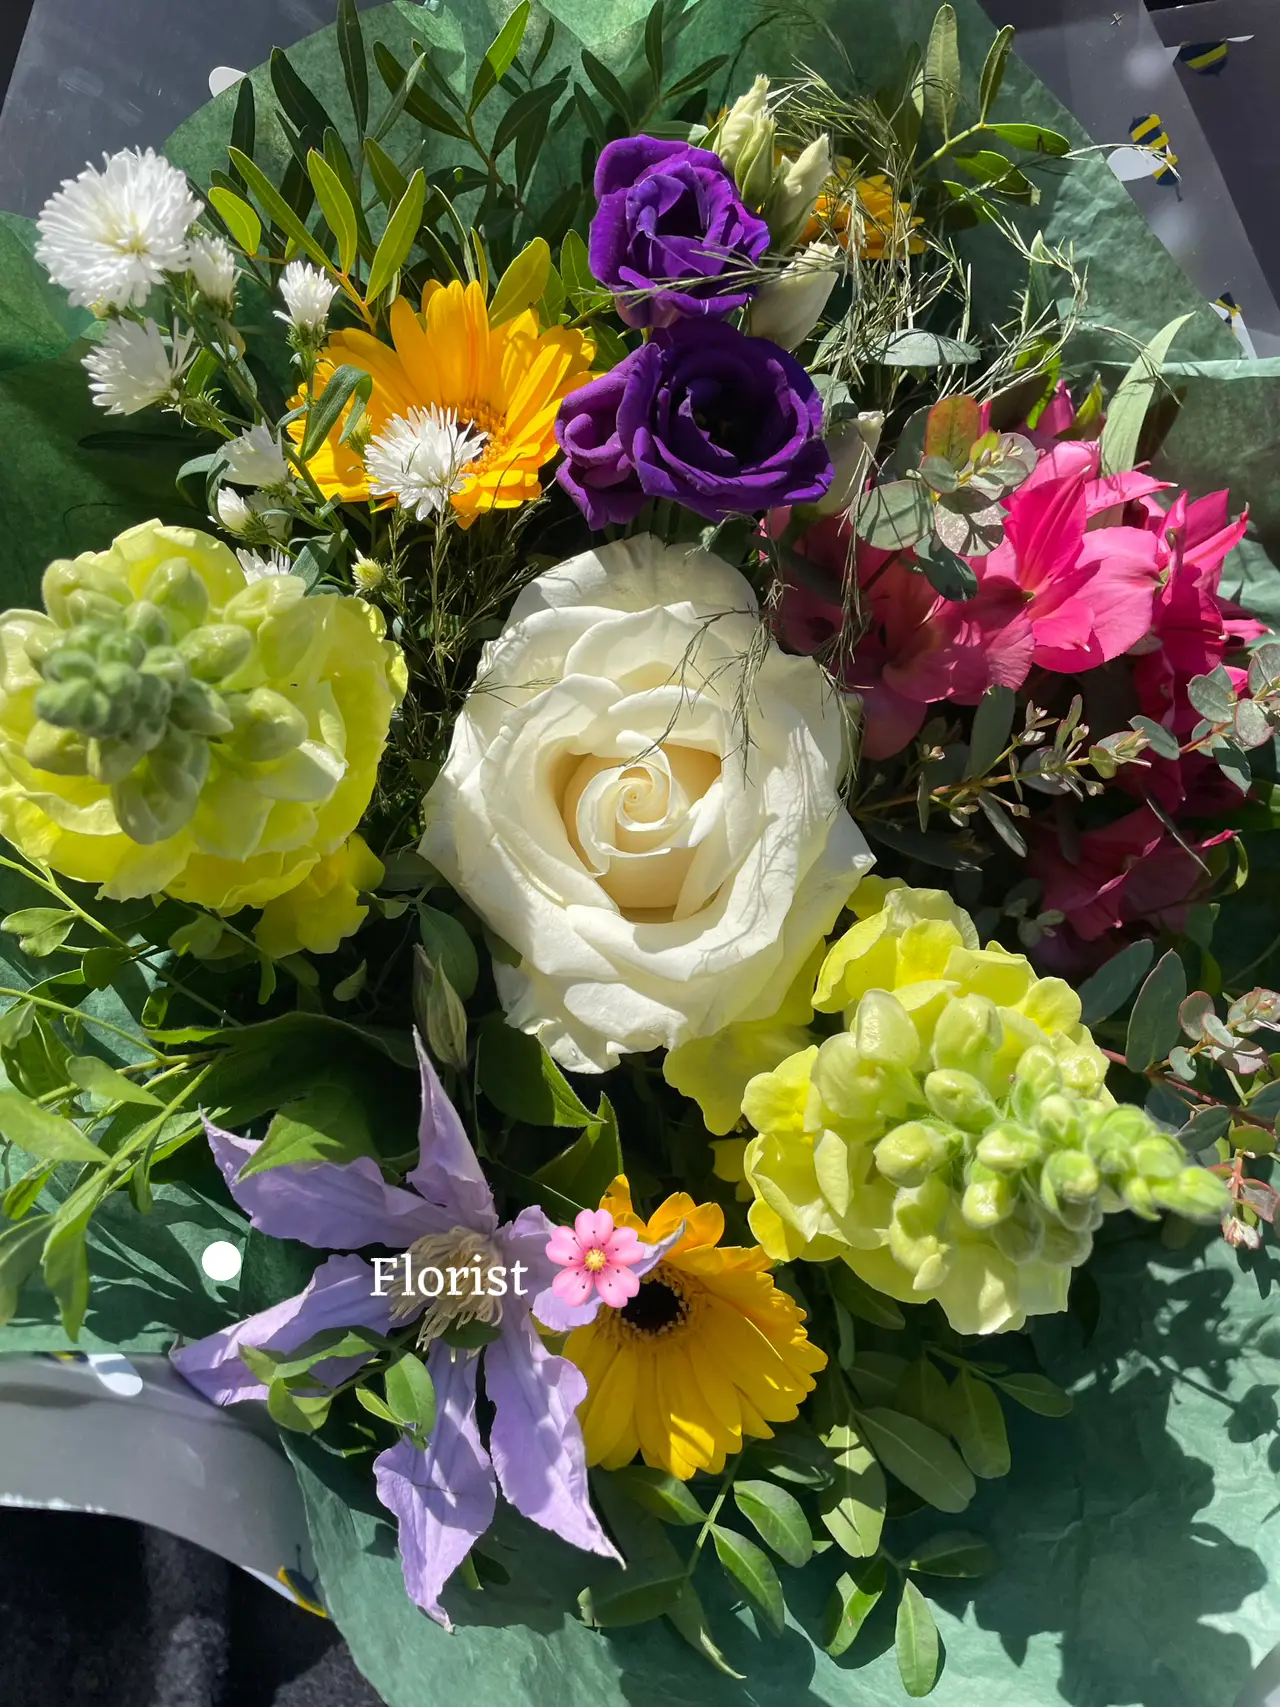  A bouquet of flowers with a card that says "Flowerist".